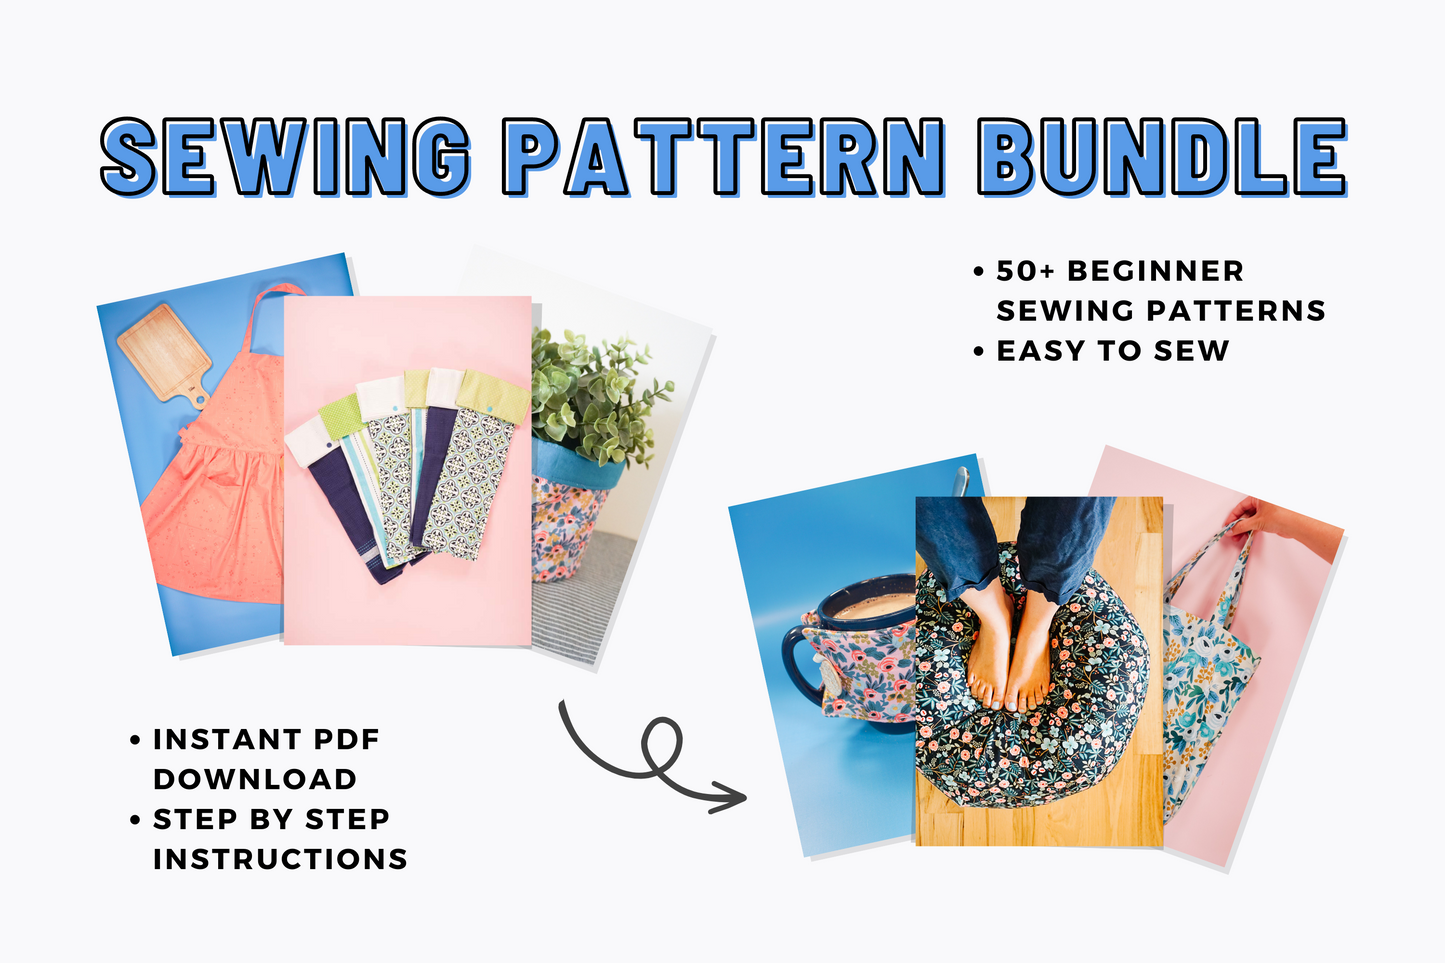 All Printable PDF Patterns and Tutorials